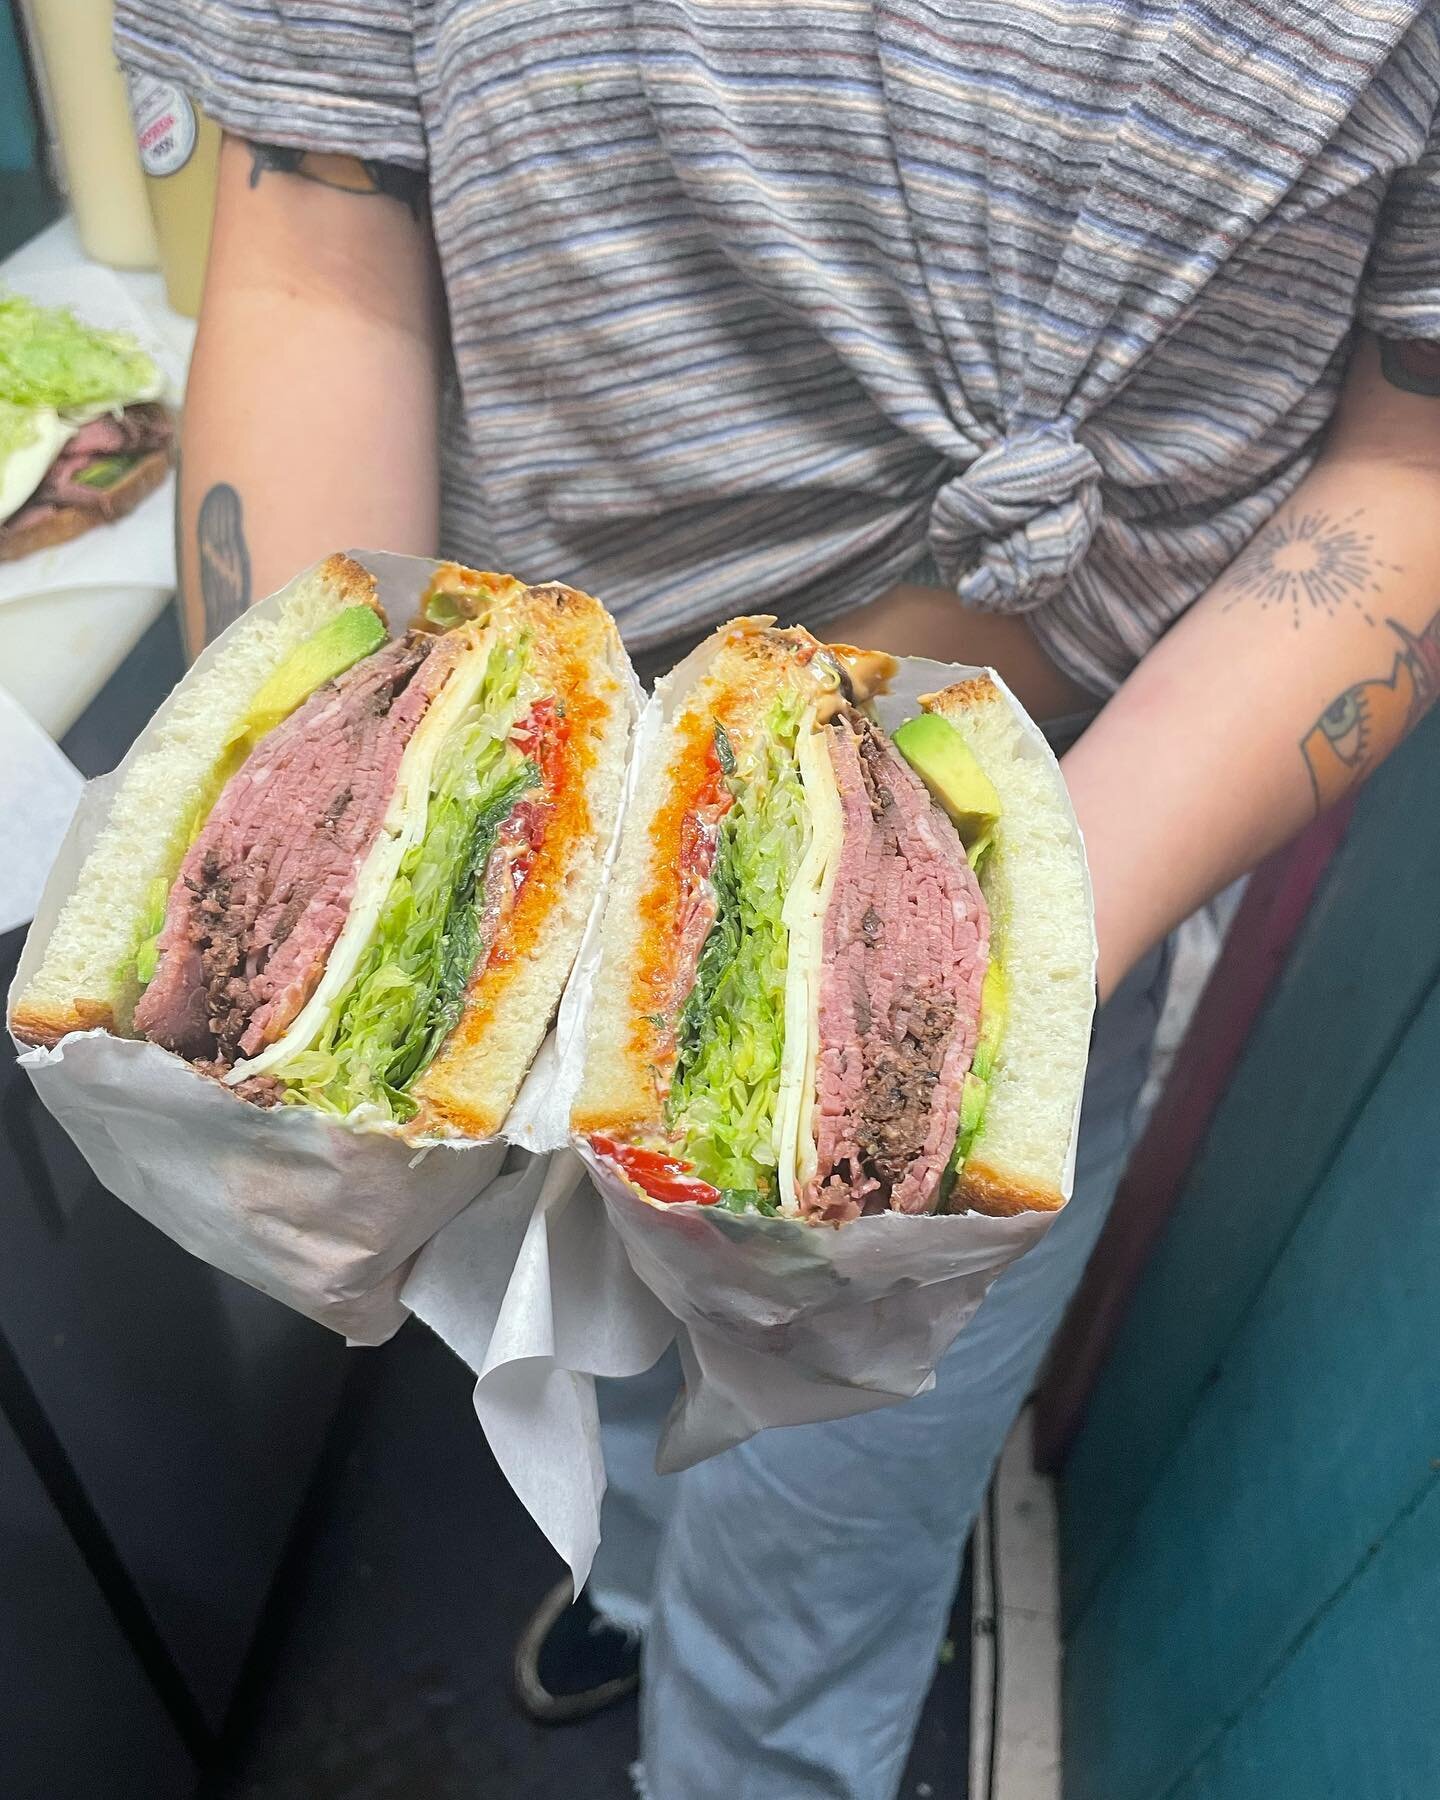 Did you know we can custom build you a sandwich any way you want ? Even if you say want to get a little crazy and build a $25 sandwich&hellip; we are so proud of our patrons and of course our amazing sandwich artist staff!